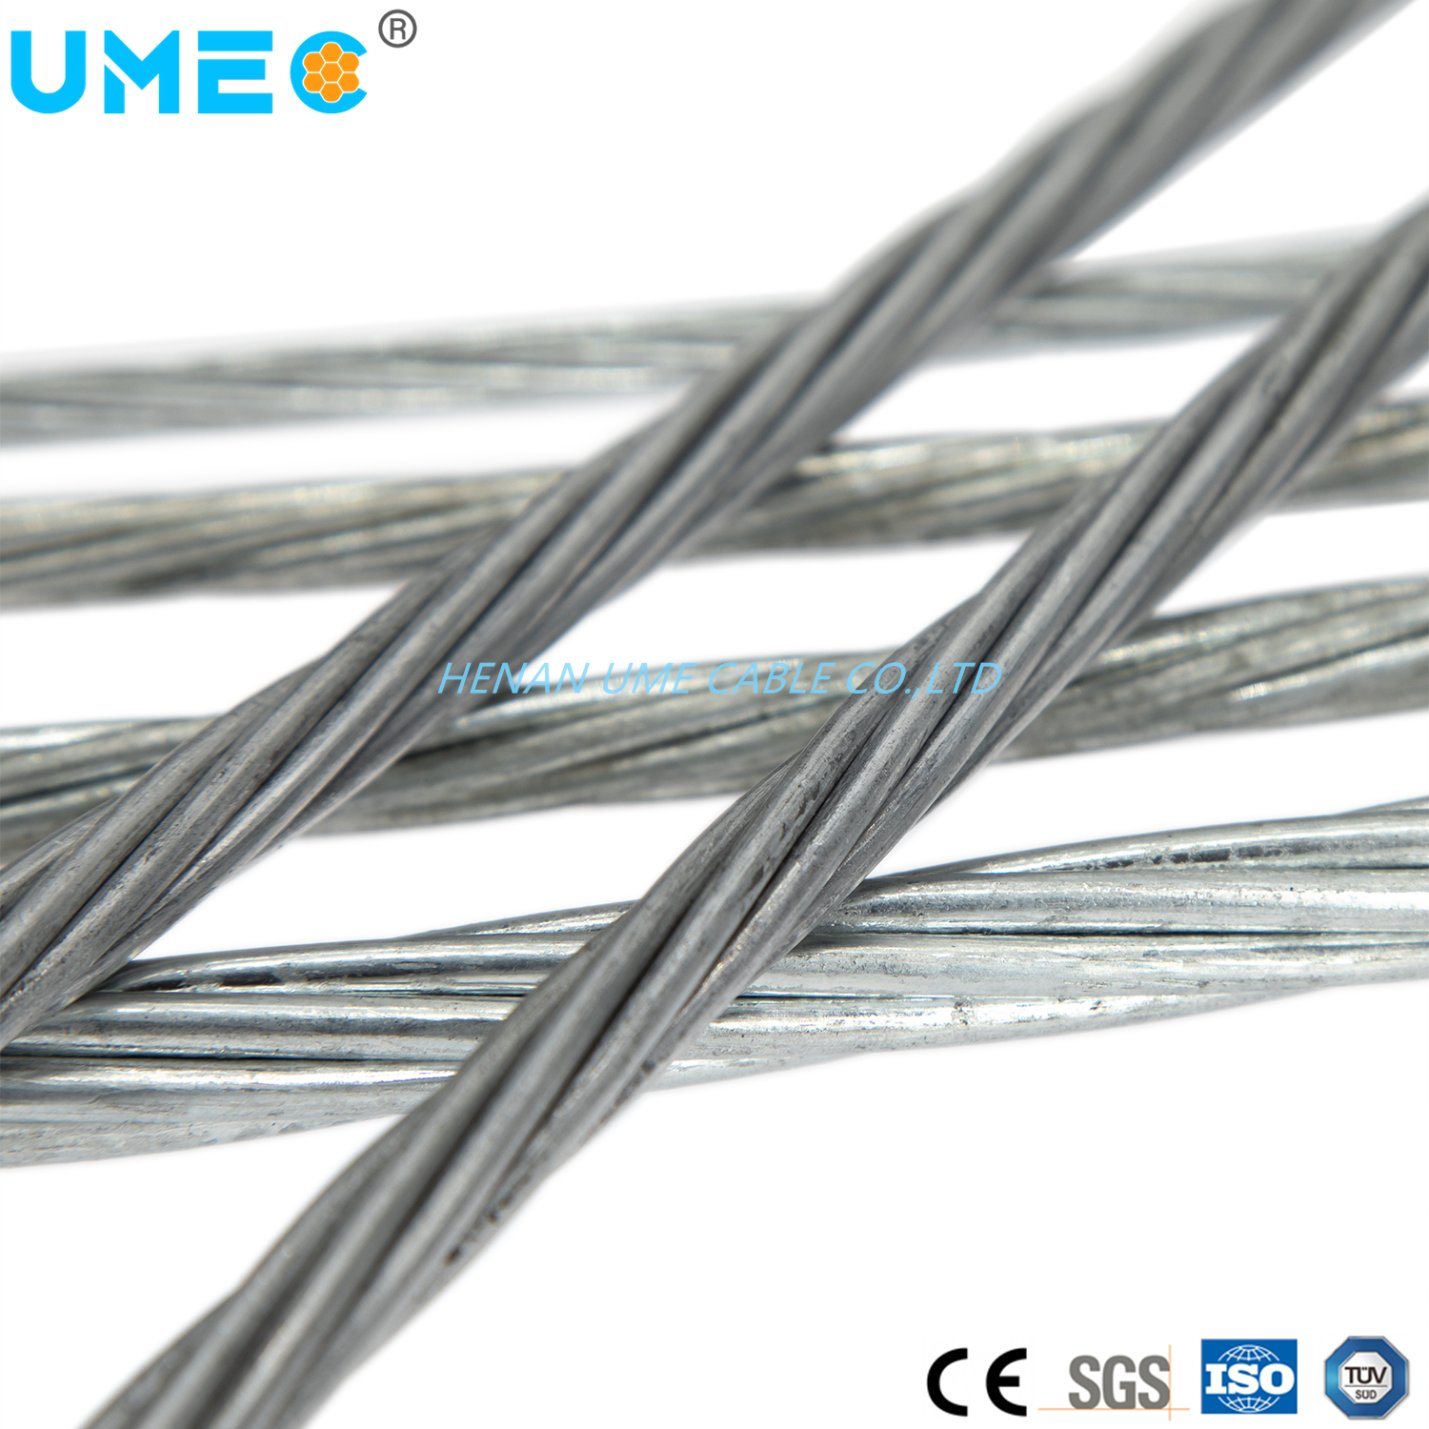 Flexible Copper Coating Electrical Power Transmission Line Galvanized Steel Wire Strand